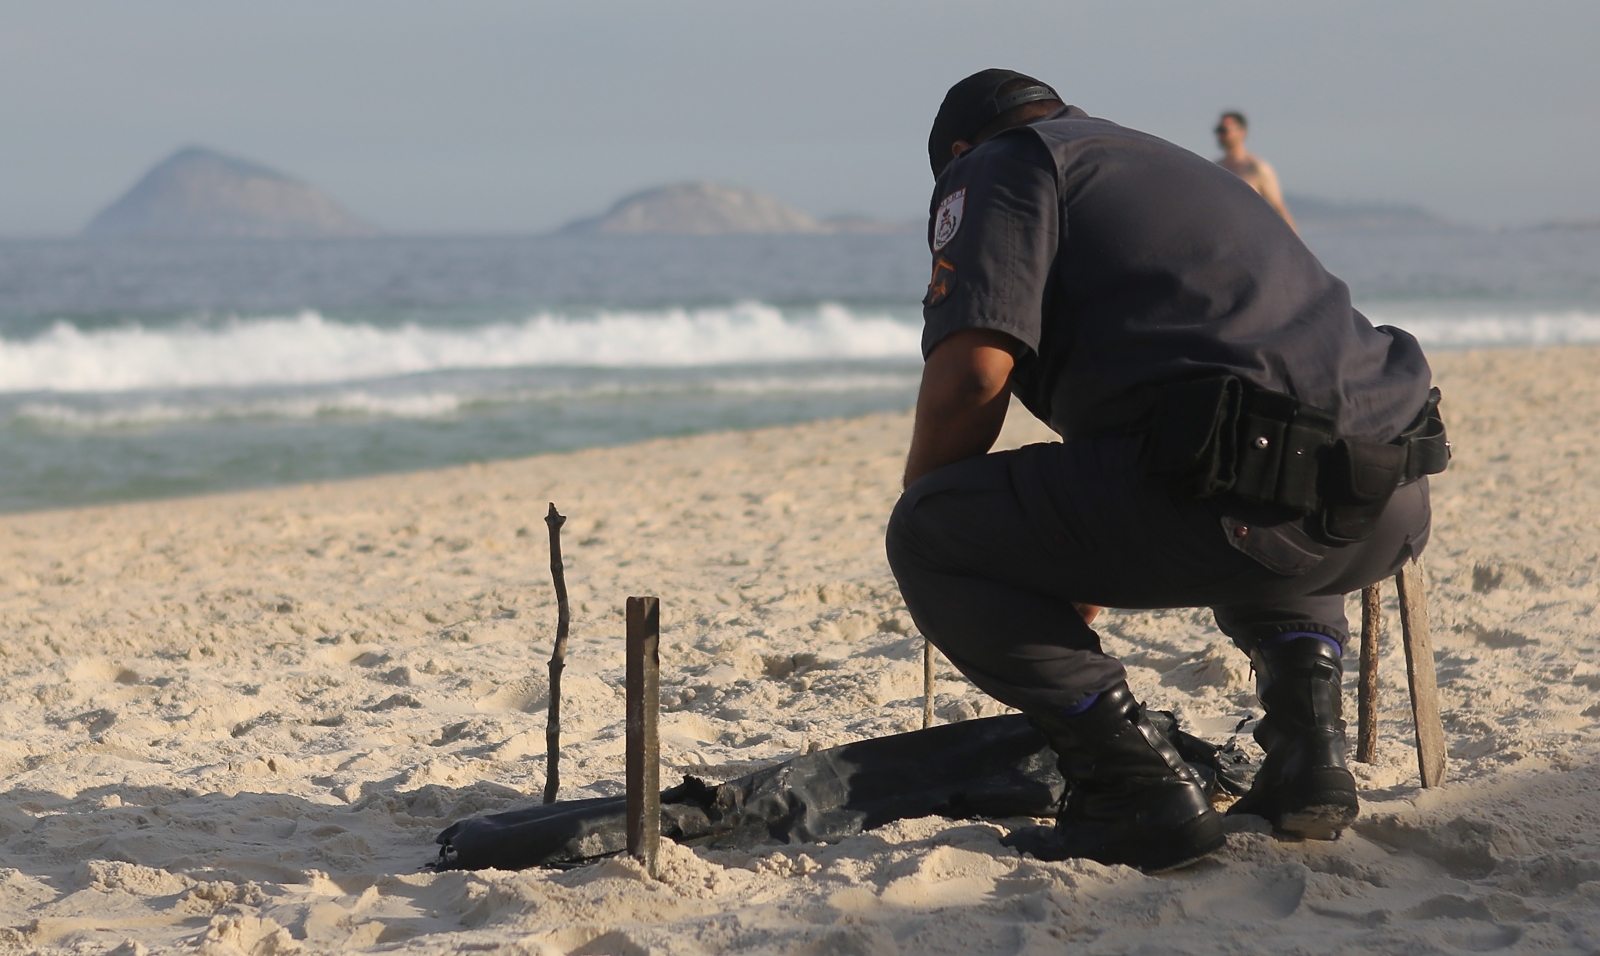 Mutilated body parts found on Rio shore next to beach volleyball site